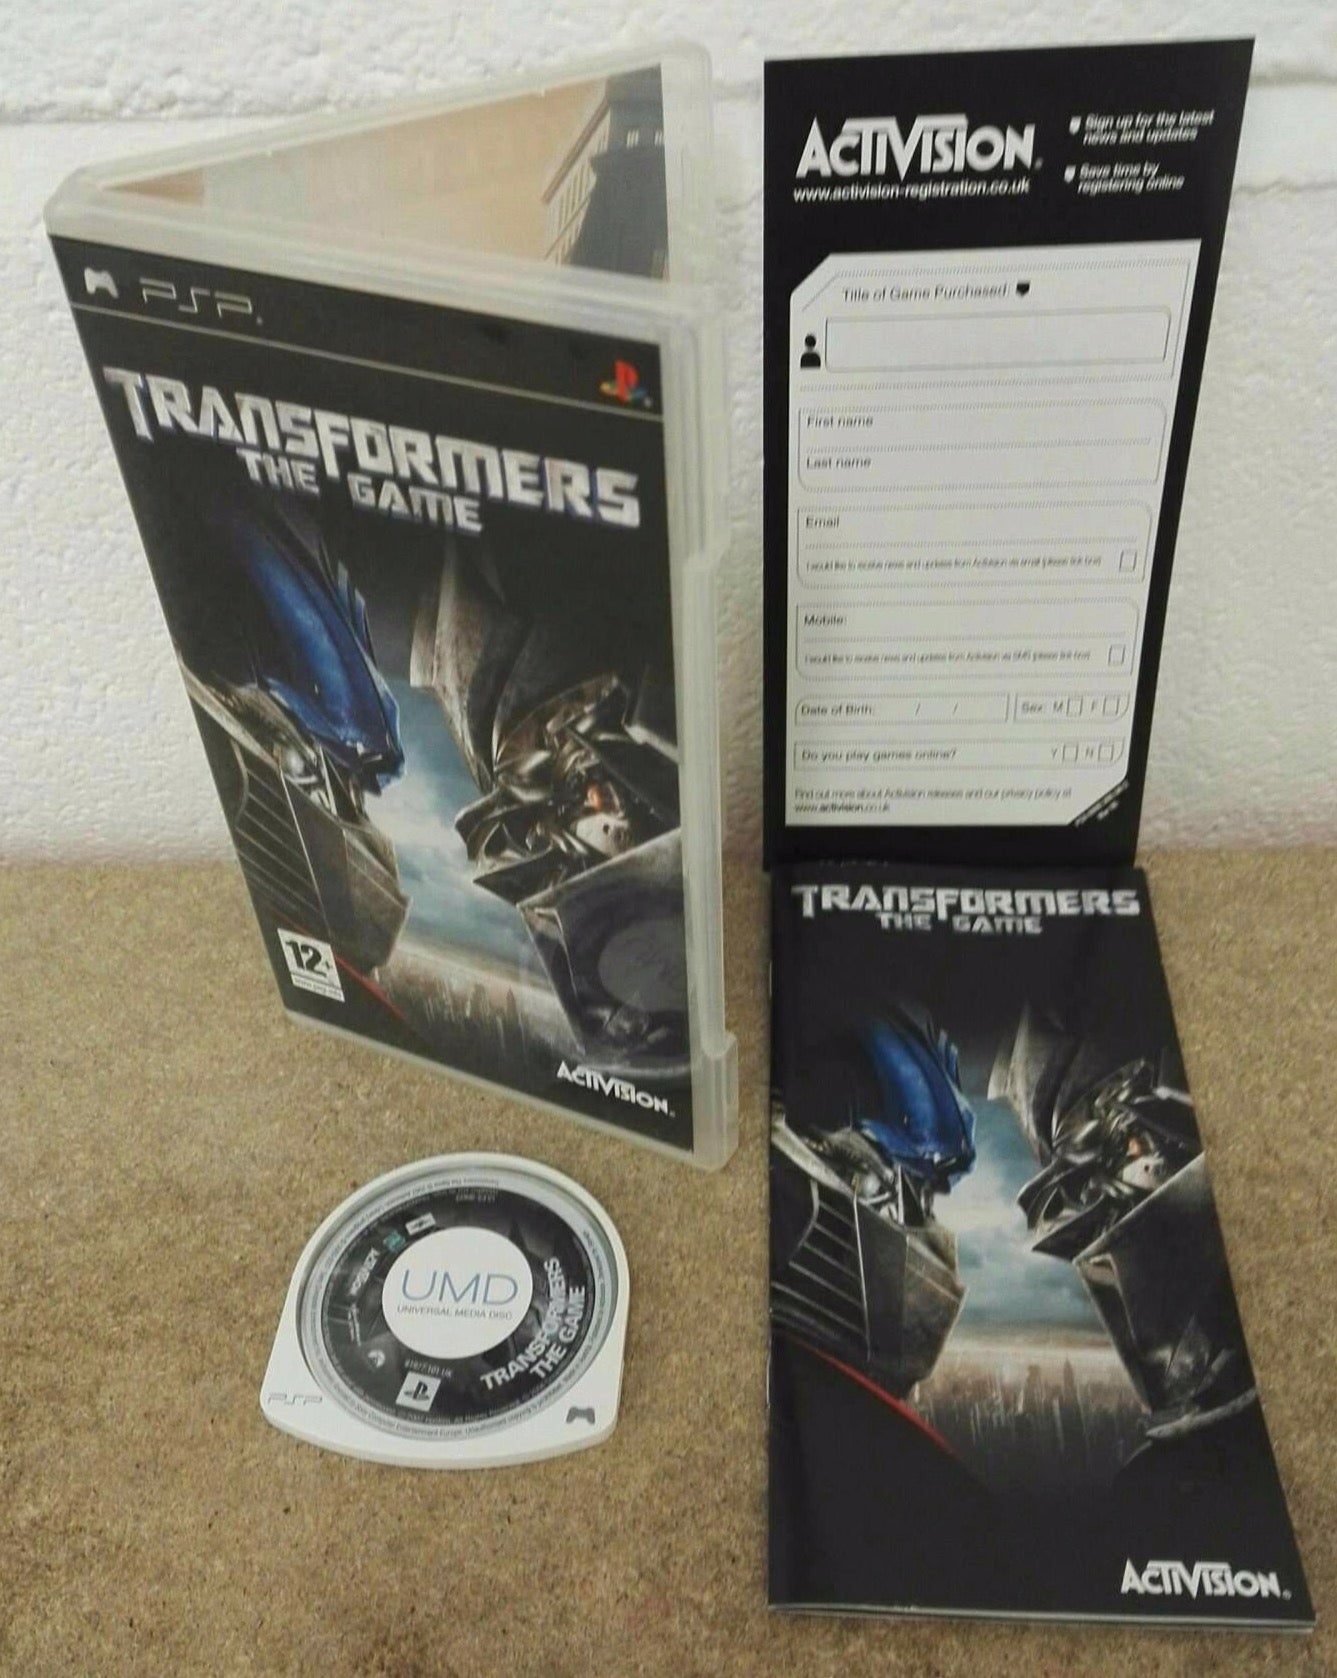 Transformers Sony PSP Game